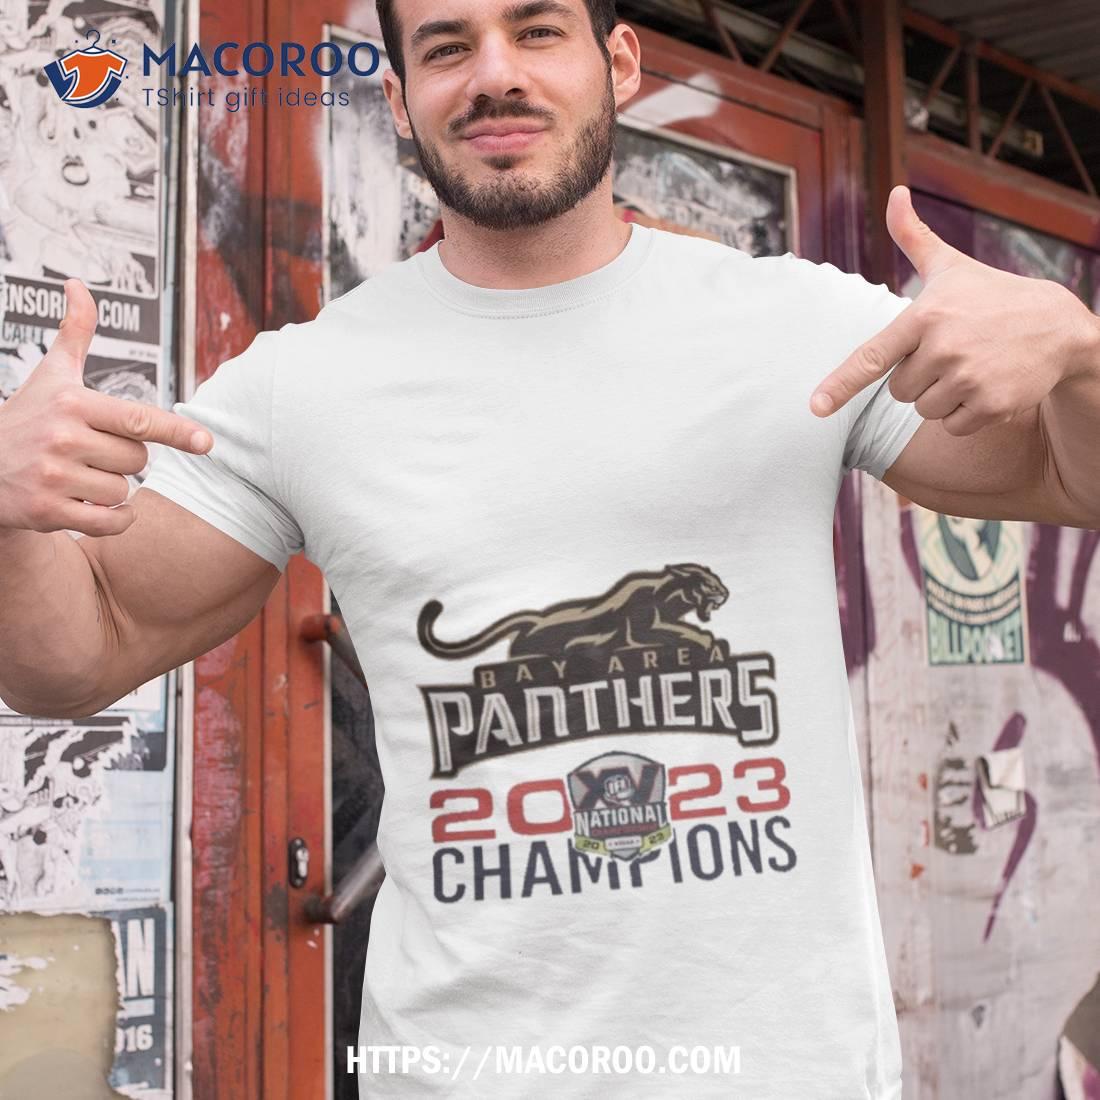 Bay Area Panthers Panthers Limited Edition Championship Parade Shirt